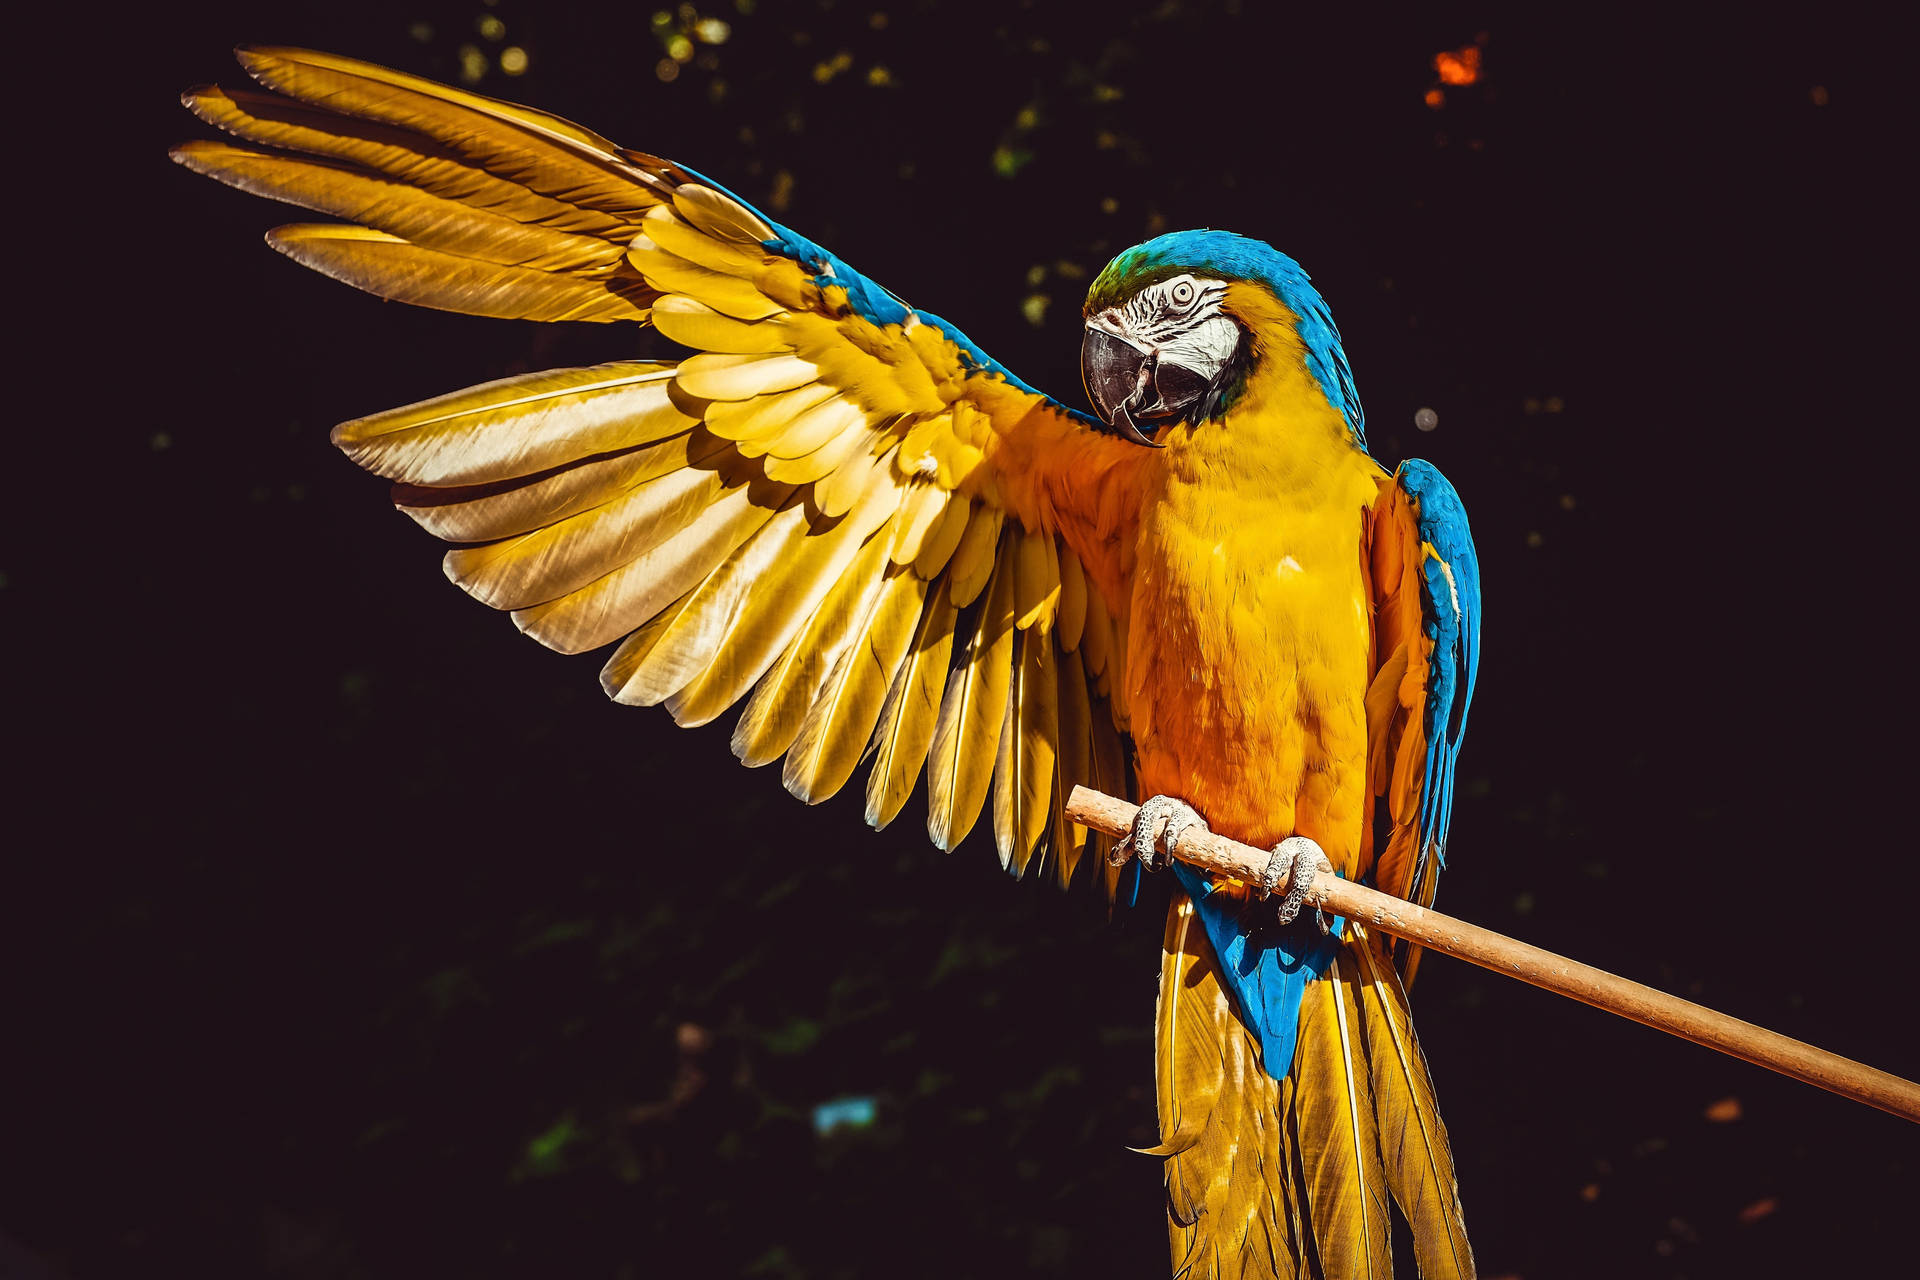 Caption: Vibrant Blue And Yellow Macaw In The Wild